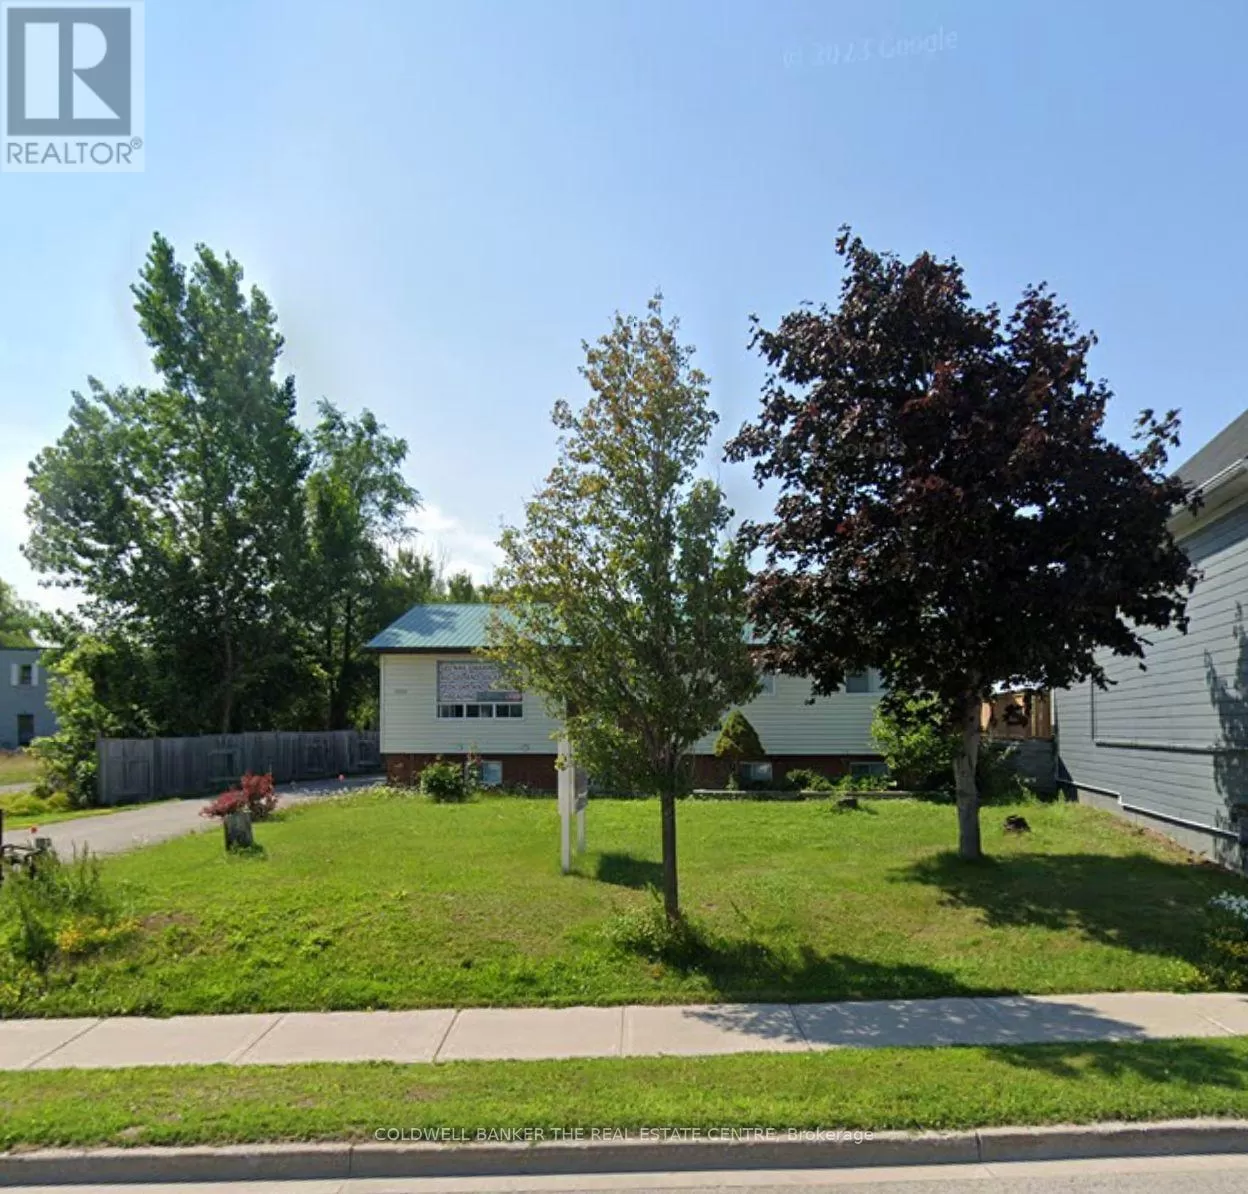 Offices for rent: #101 -1221 Innisfil Beach Rd, Innisfil, Ontario L9S 4B2